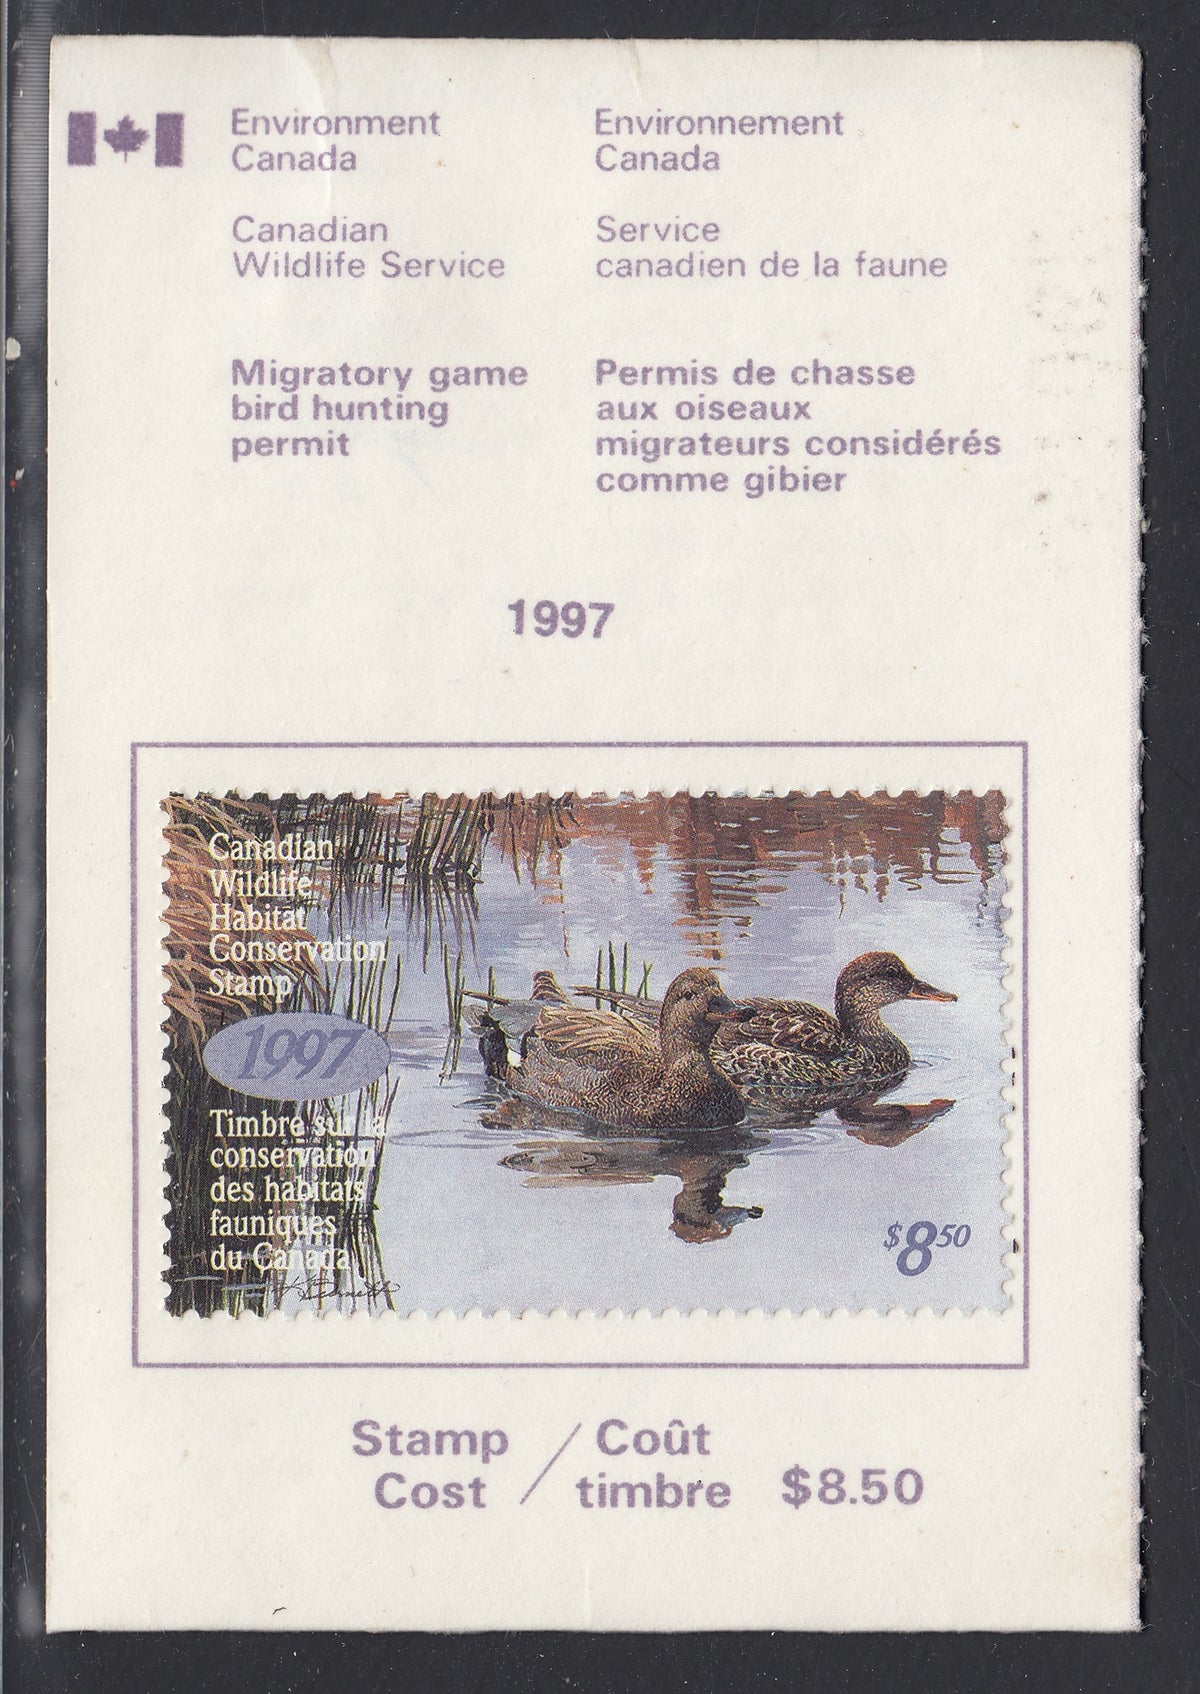 0013FW2105 - FWH13a - Used on License